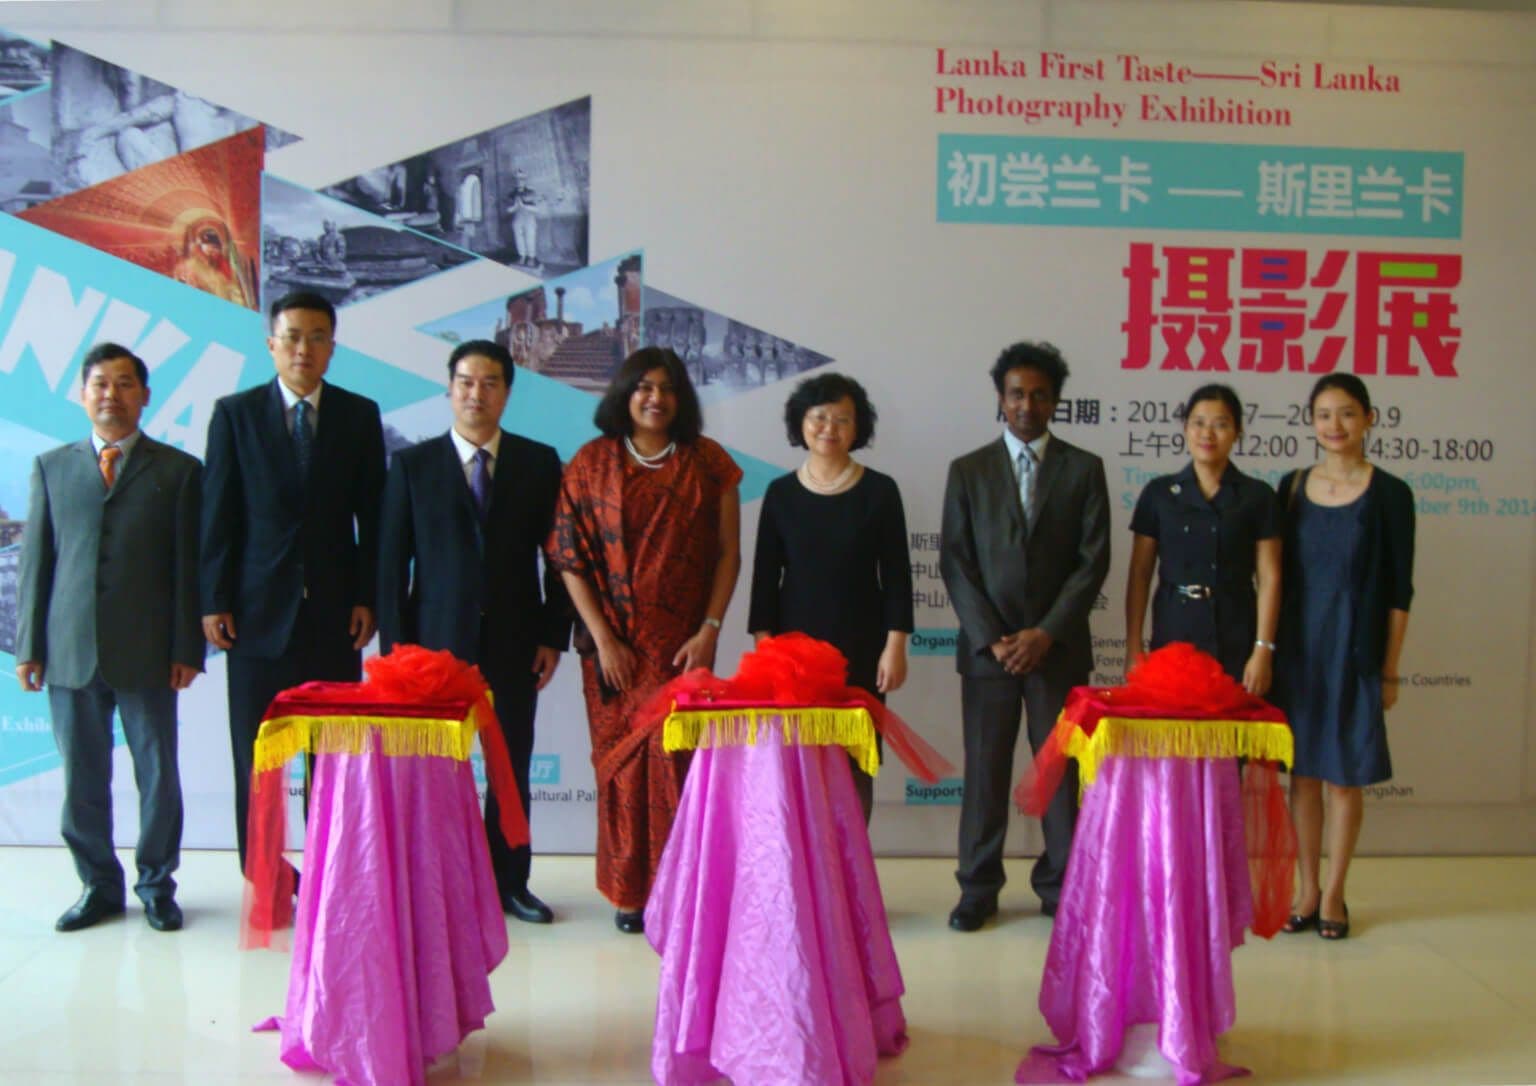 Opening ceremony for the Sri Lanka photography exhibition.